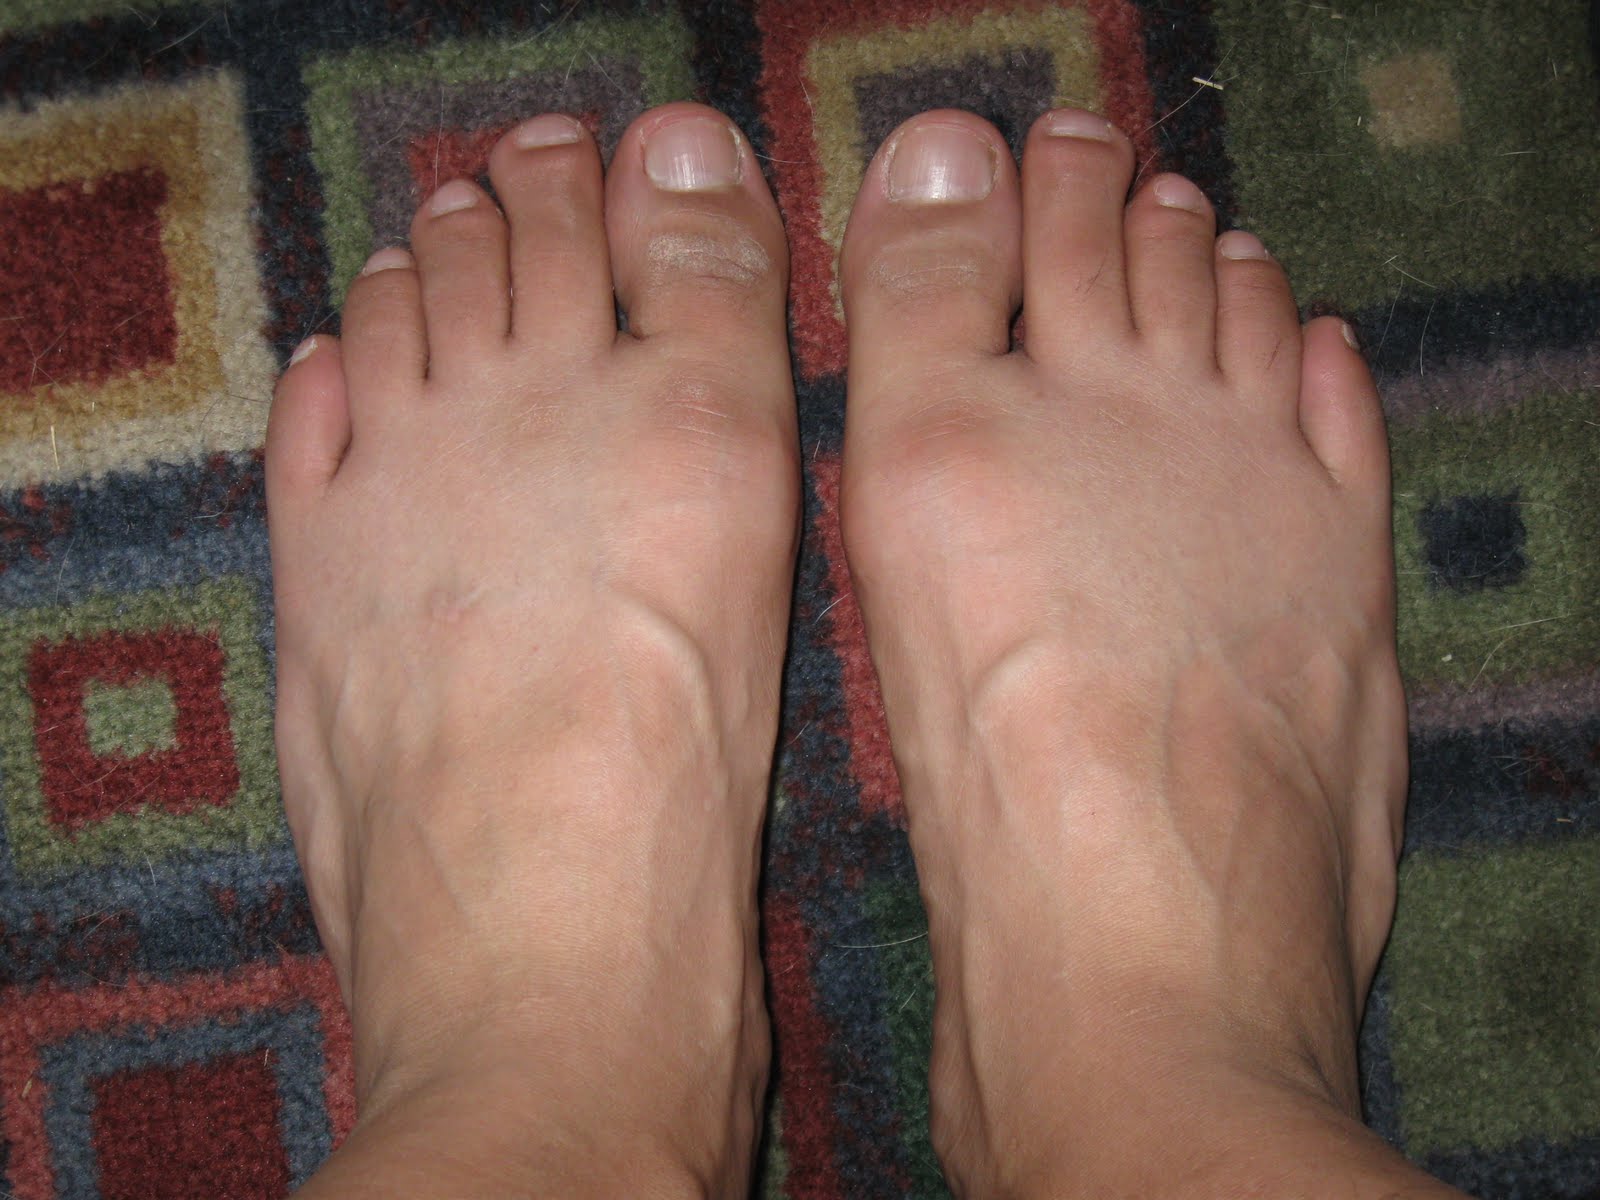 Mature feet and toes